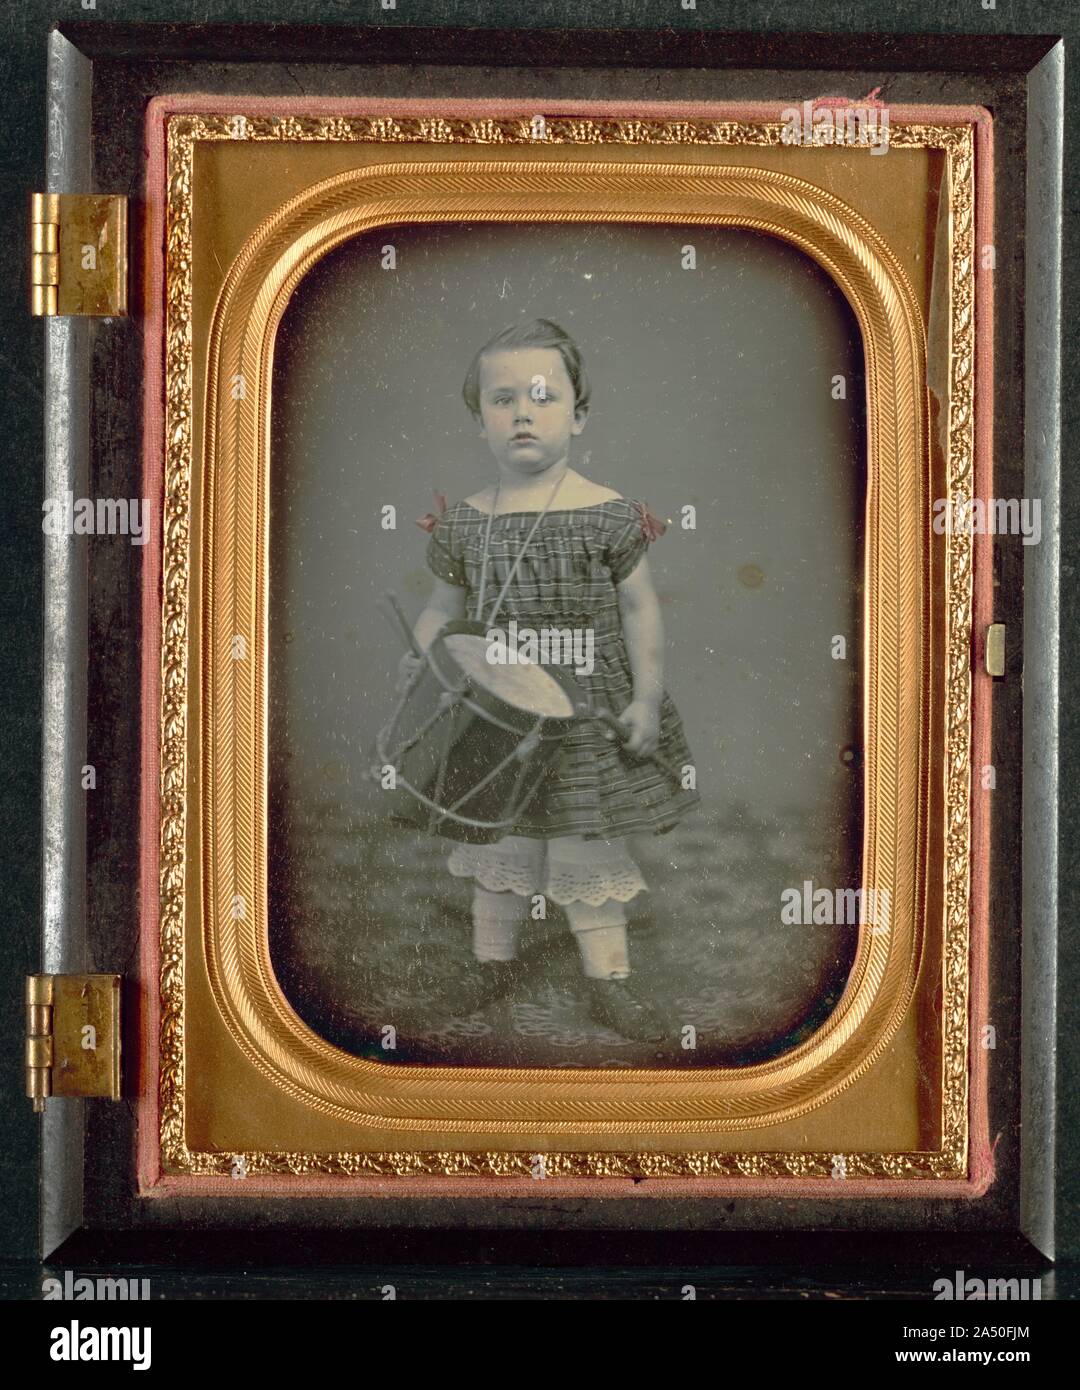 Child with Drum, 1850s. For this finely toned daguerreotype, an unknown photographer skillfully manipulated a bulky camera into a low vantagepoint, ensured even lighting, and positioned the quaintly dressed subject against a neutral background to create a charming portrait. The child was carefully coached to stare directly into the lens and to hold the toy drum and drumsticks convincingly. Perhaps the drum is meant to recall earlier times in American history and to symbolize its fight for independence. Stock Photo